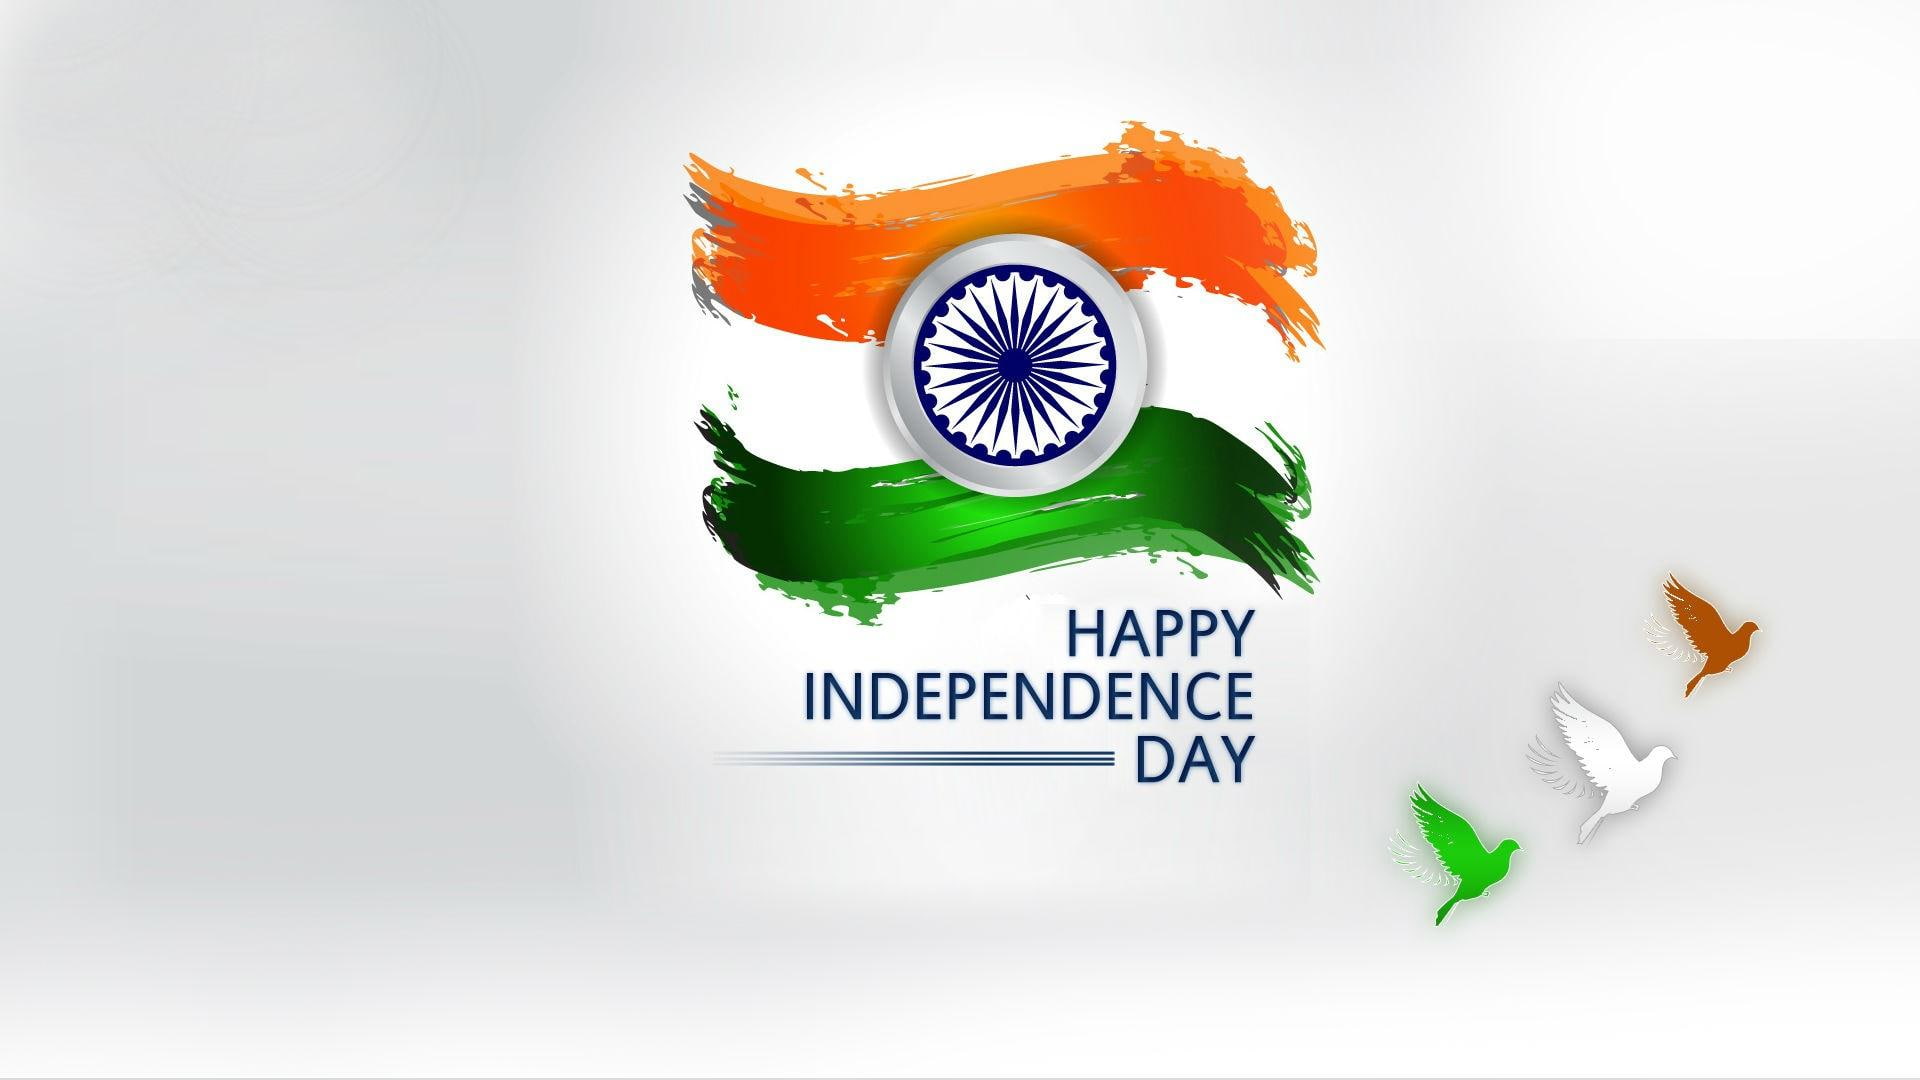 Happy Independence Day 2014 HD, 1920x1080, 15th august, india